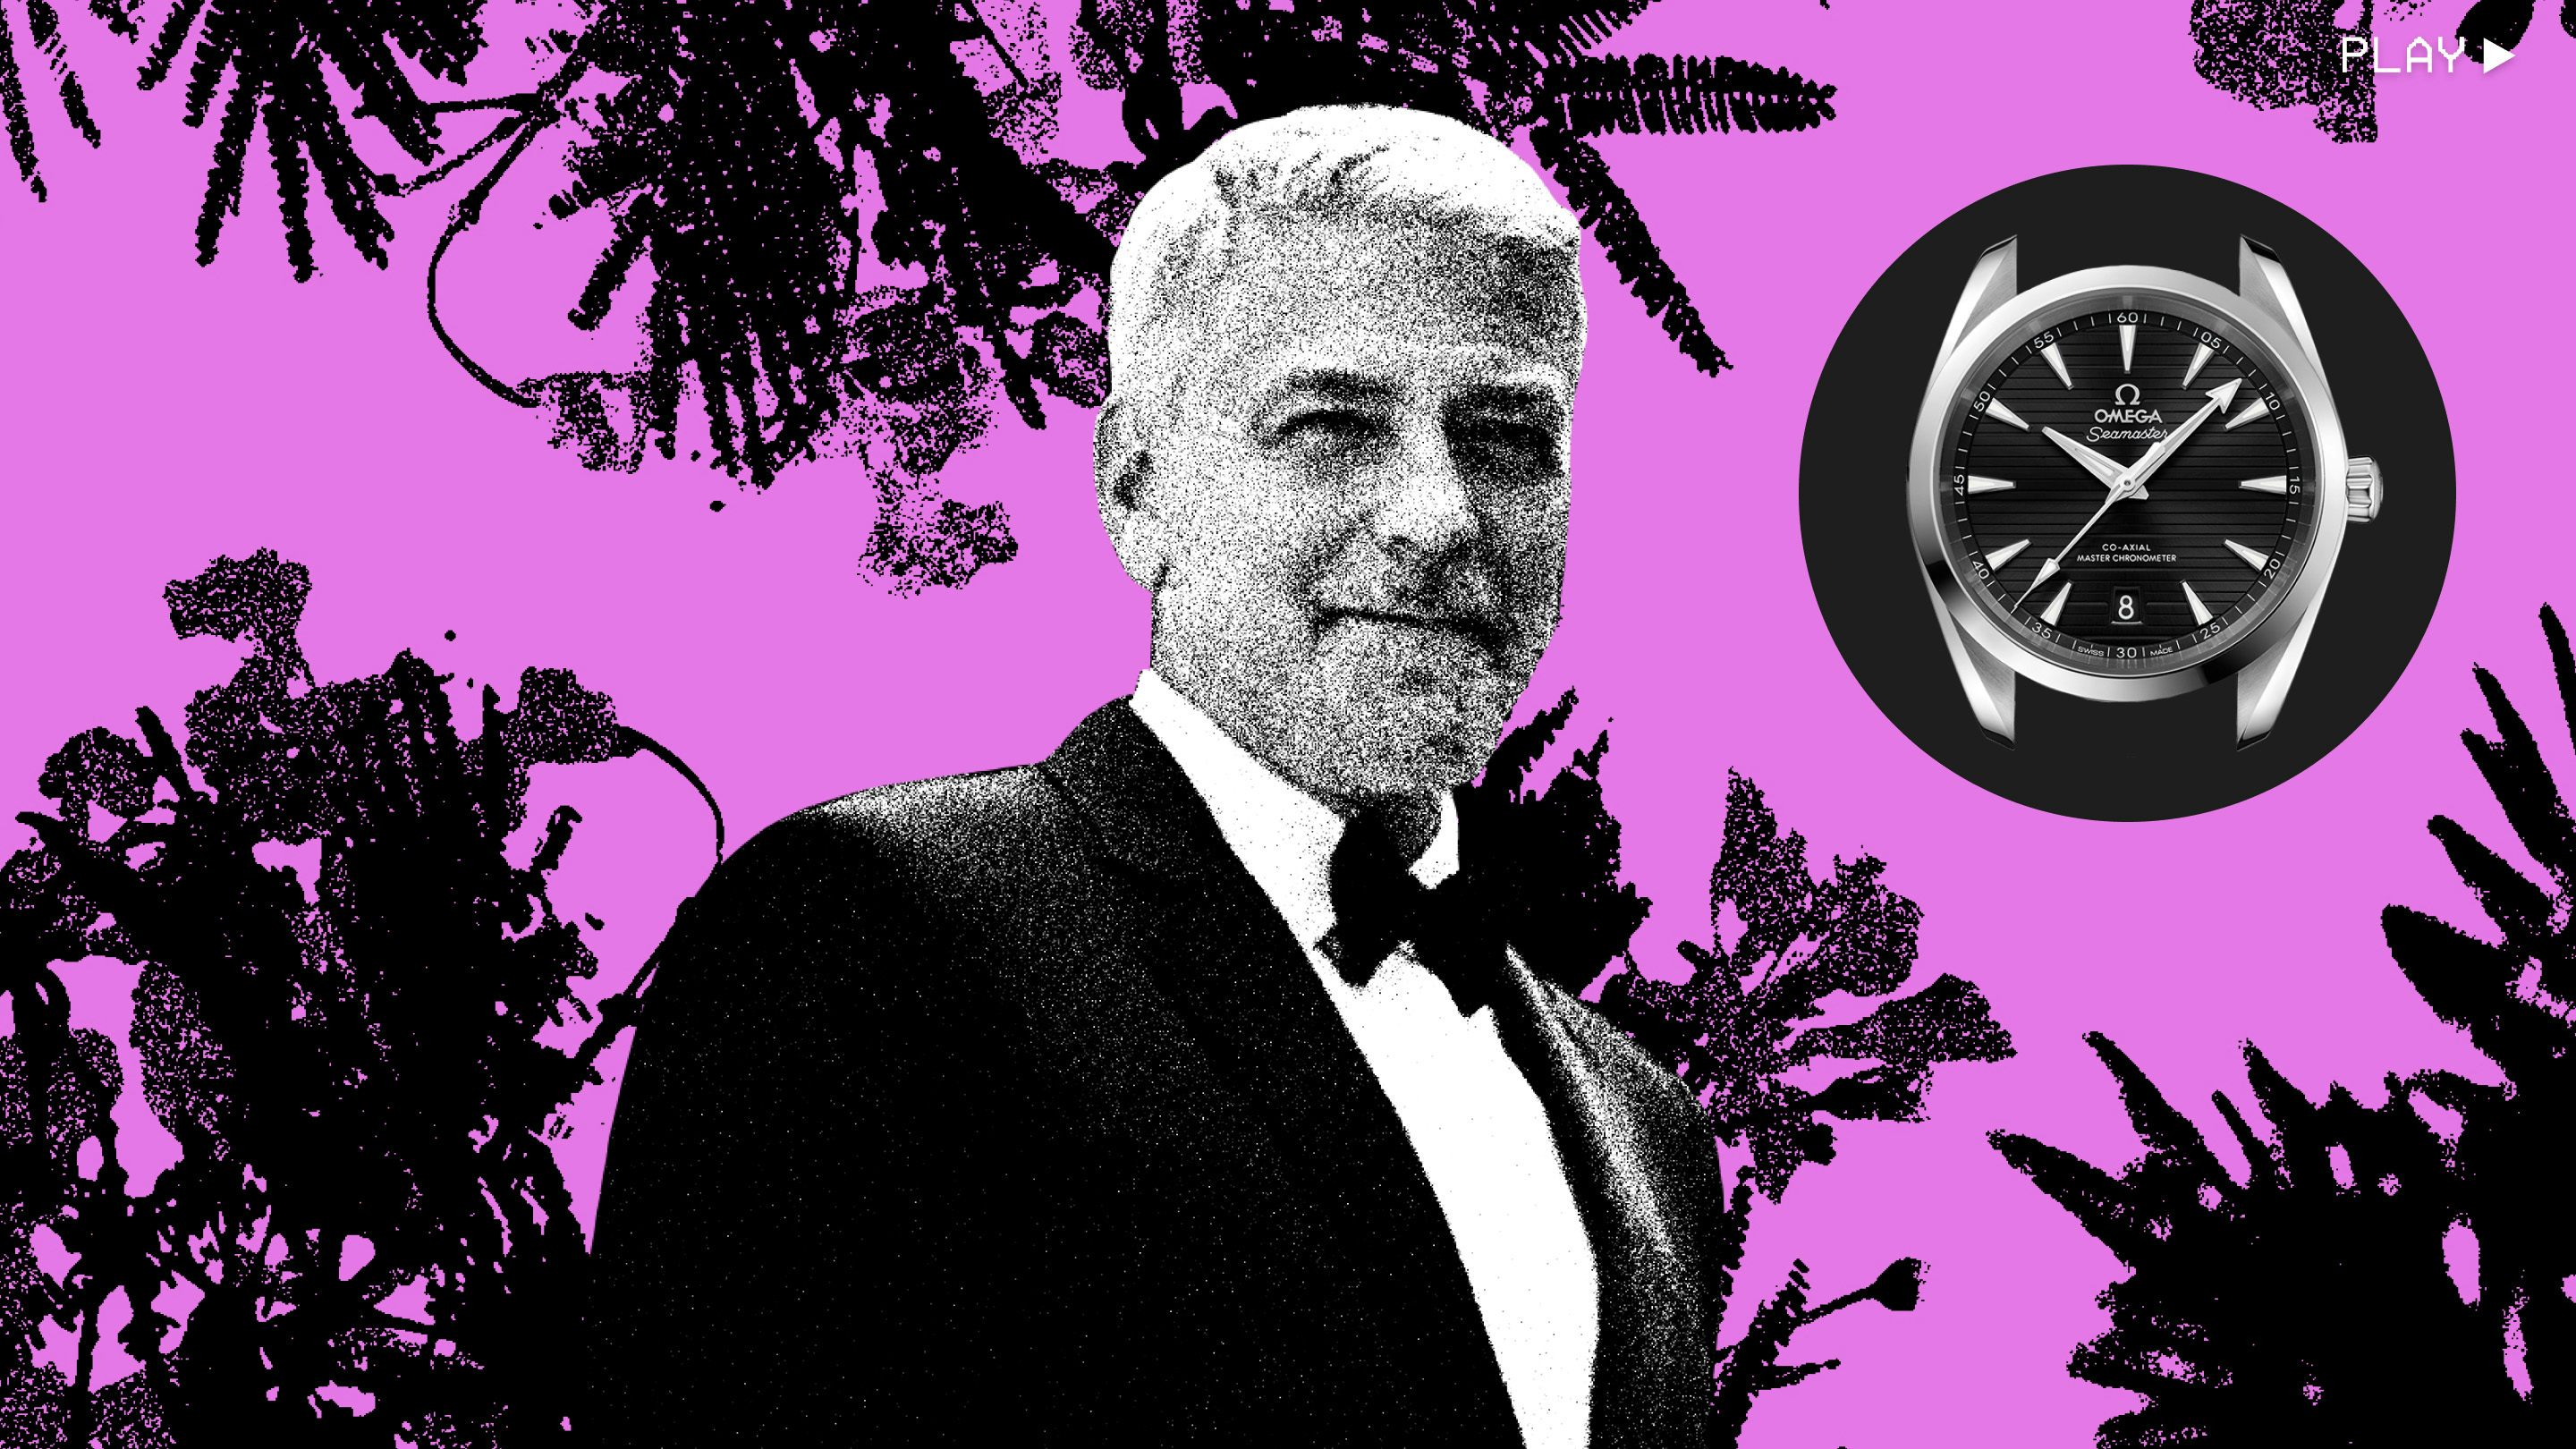 What Watch Does George Clooney Wear In 'Ticket to Paradise'?